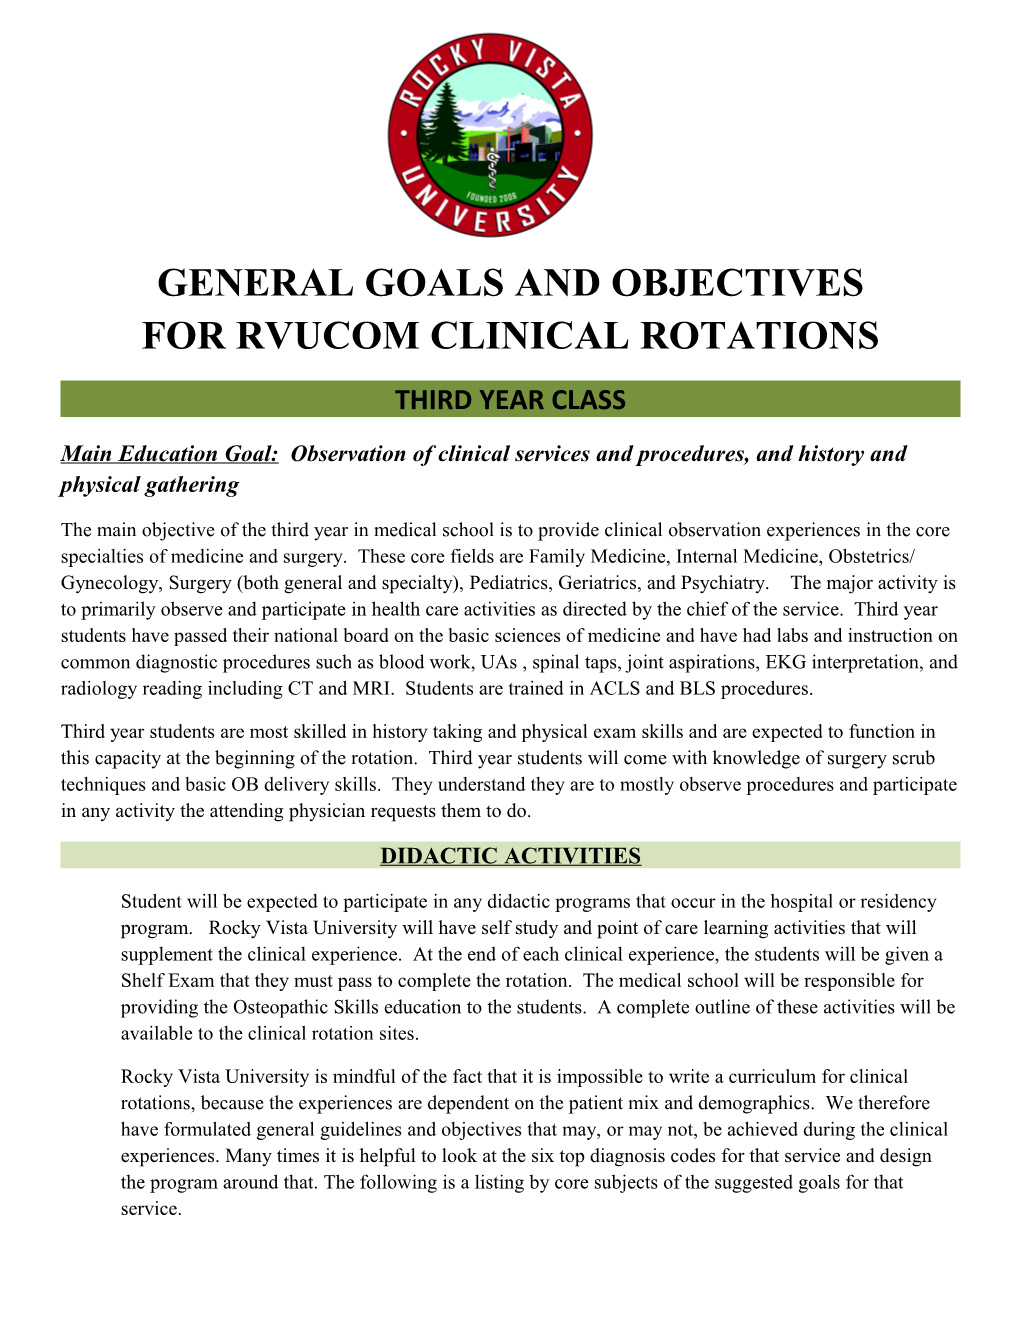 Generalgoals and Objectives for Rvucom Clinical Rotations